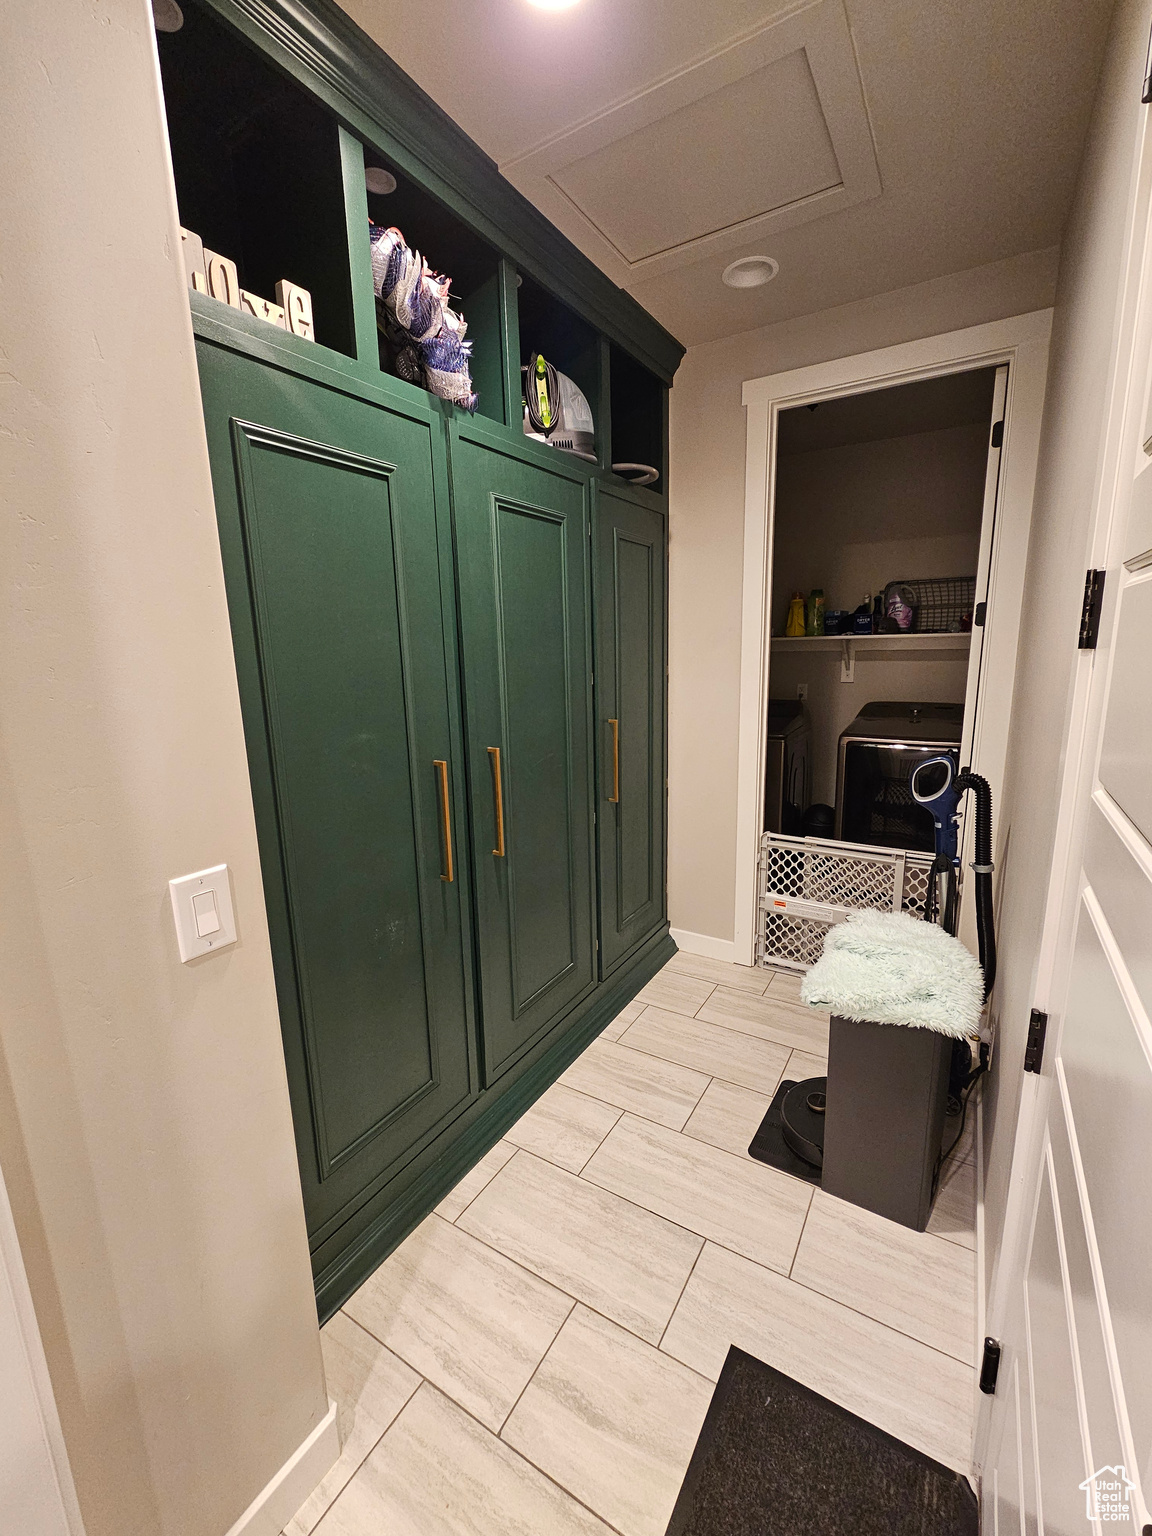 Custom Cabinetry w/ garage door entry and walkway to laundry room